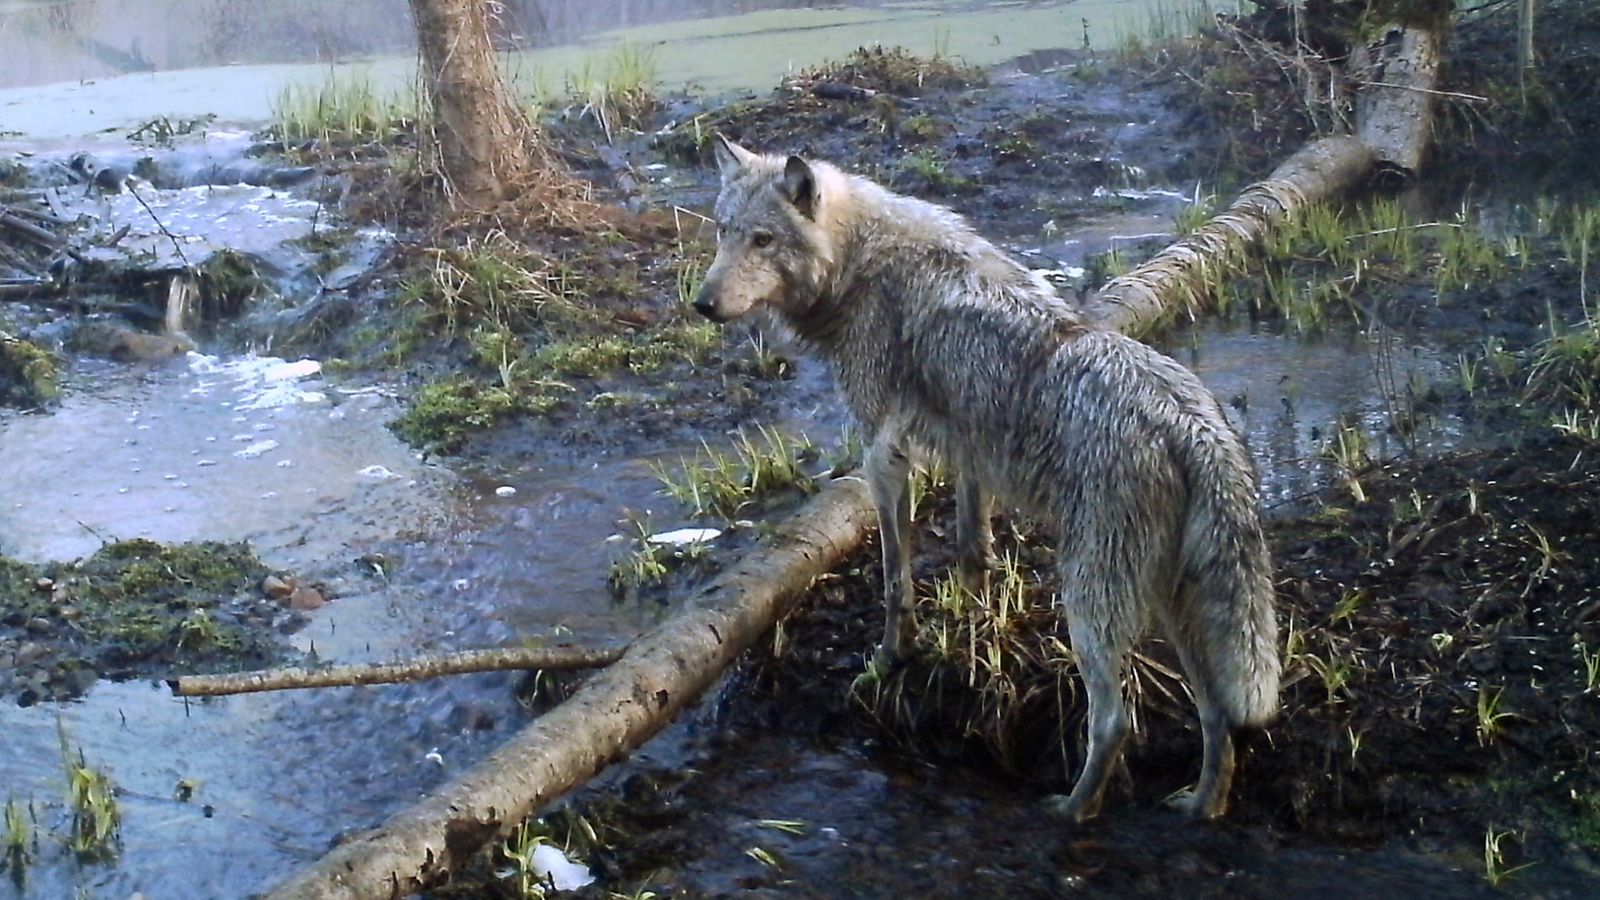 chernobyl's mutant wolves appear to have developed resistance to cancer, study finds